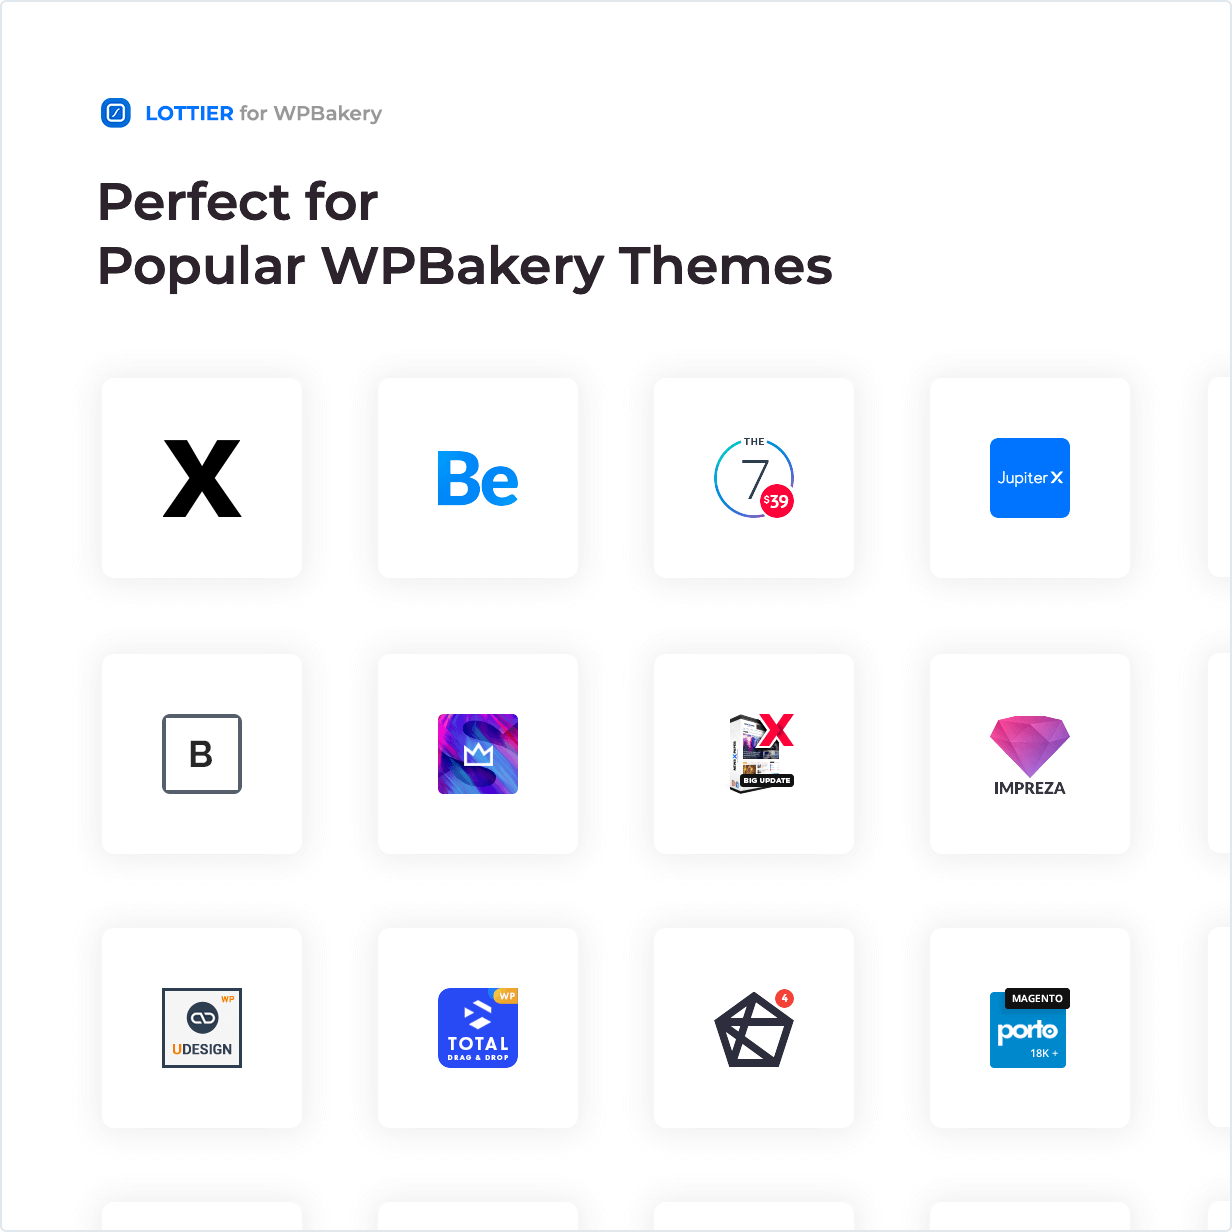 Perfect for Popular WPBakery Themes